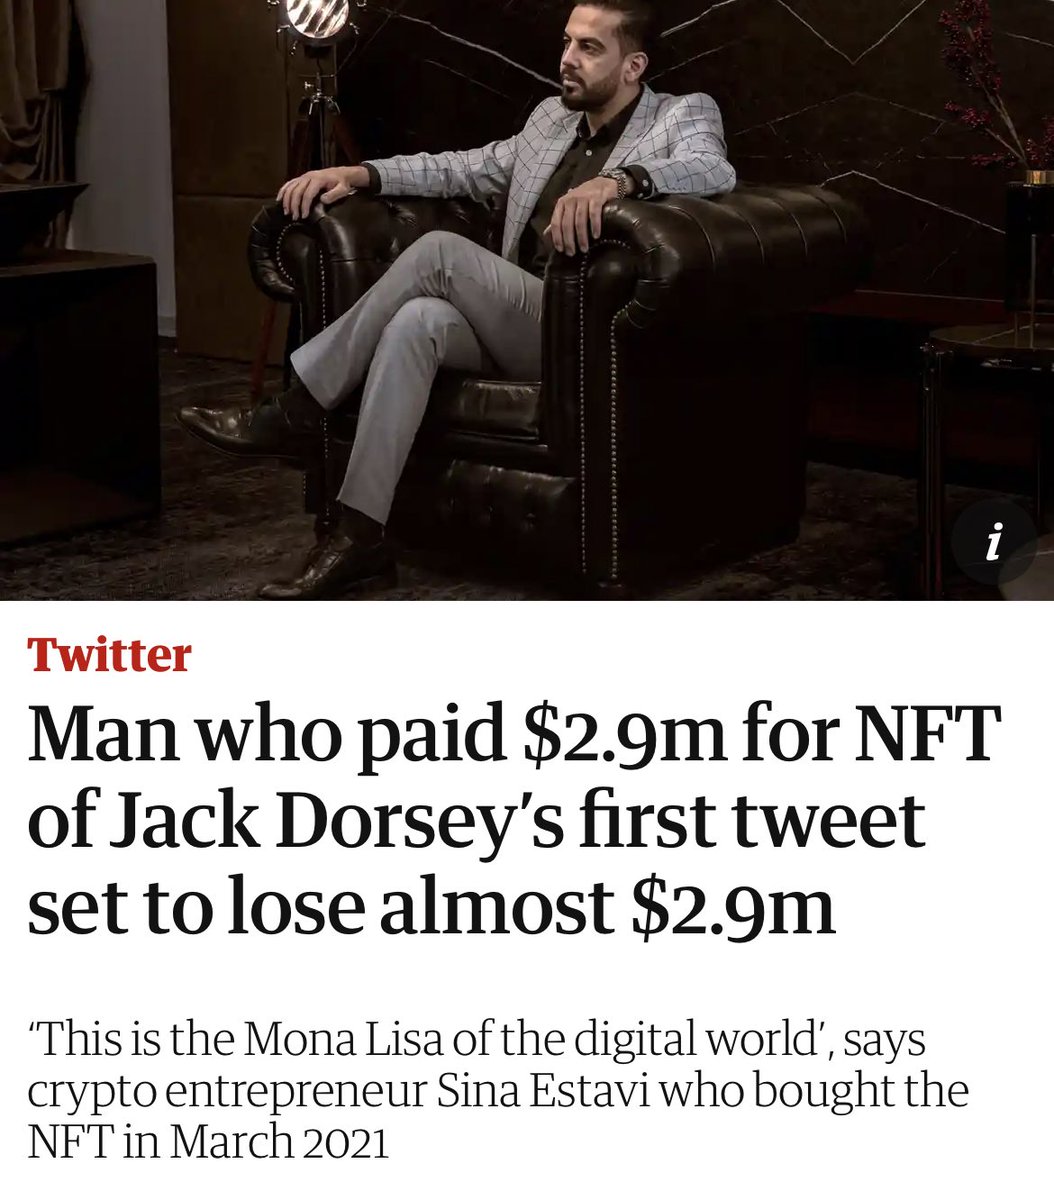 This is the greatest headline of our times (via @guardian)